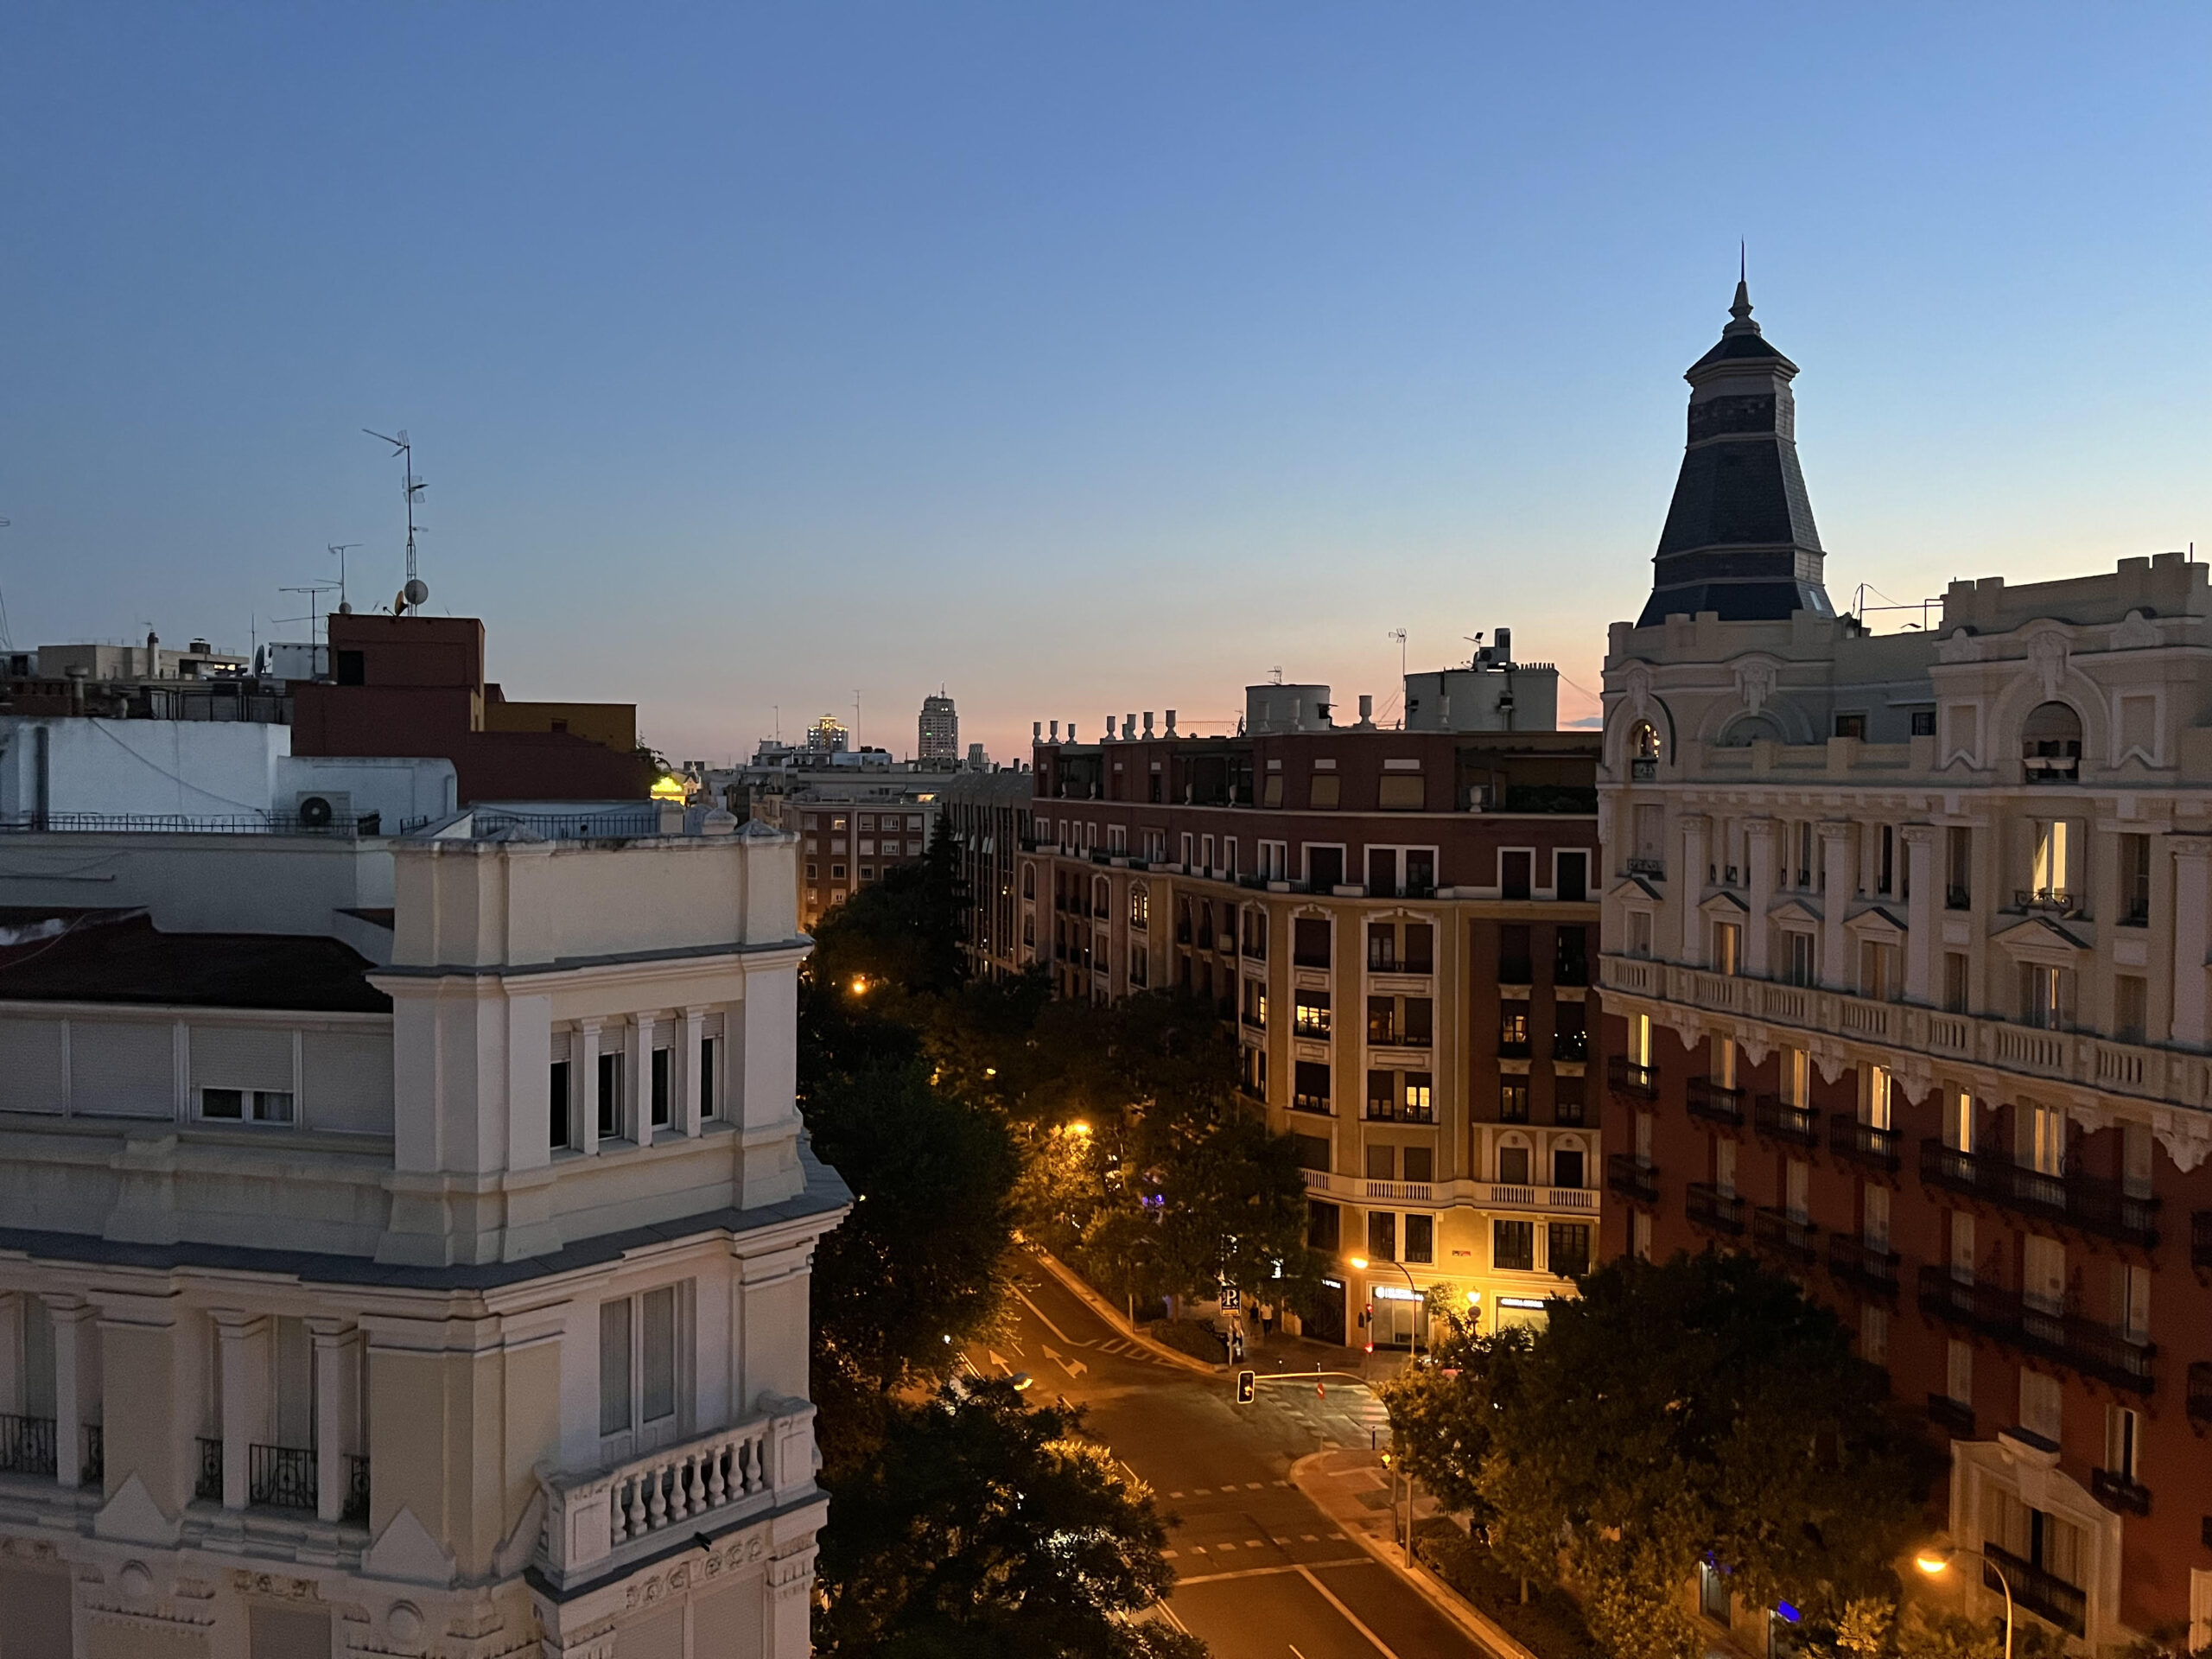 The view from the Emzingo apartments, situated on the fourth through sixth floor of the building, provided sweeping views of the Madrid neighborhood. | Adam Huang photo